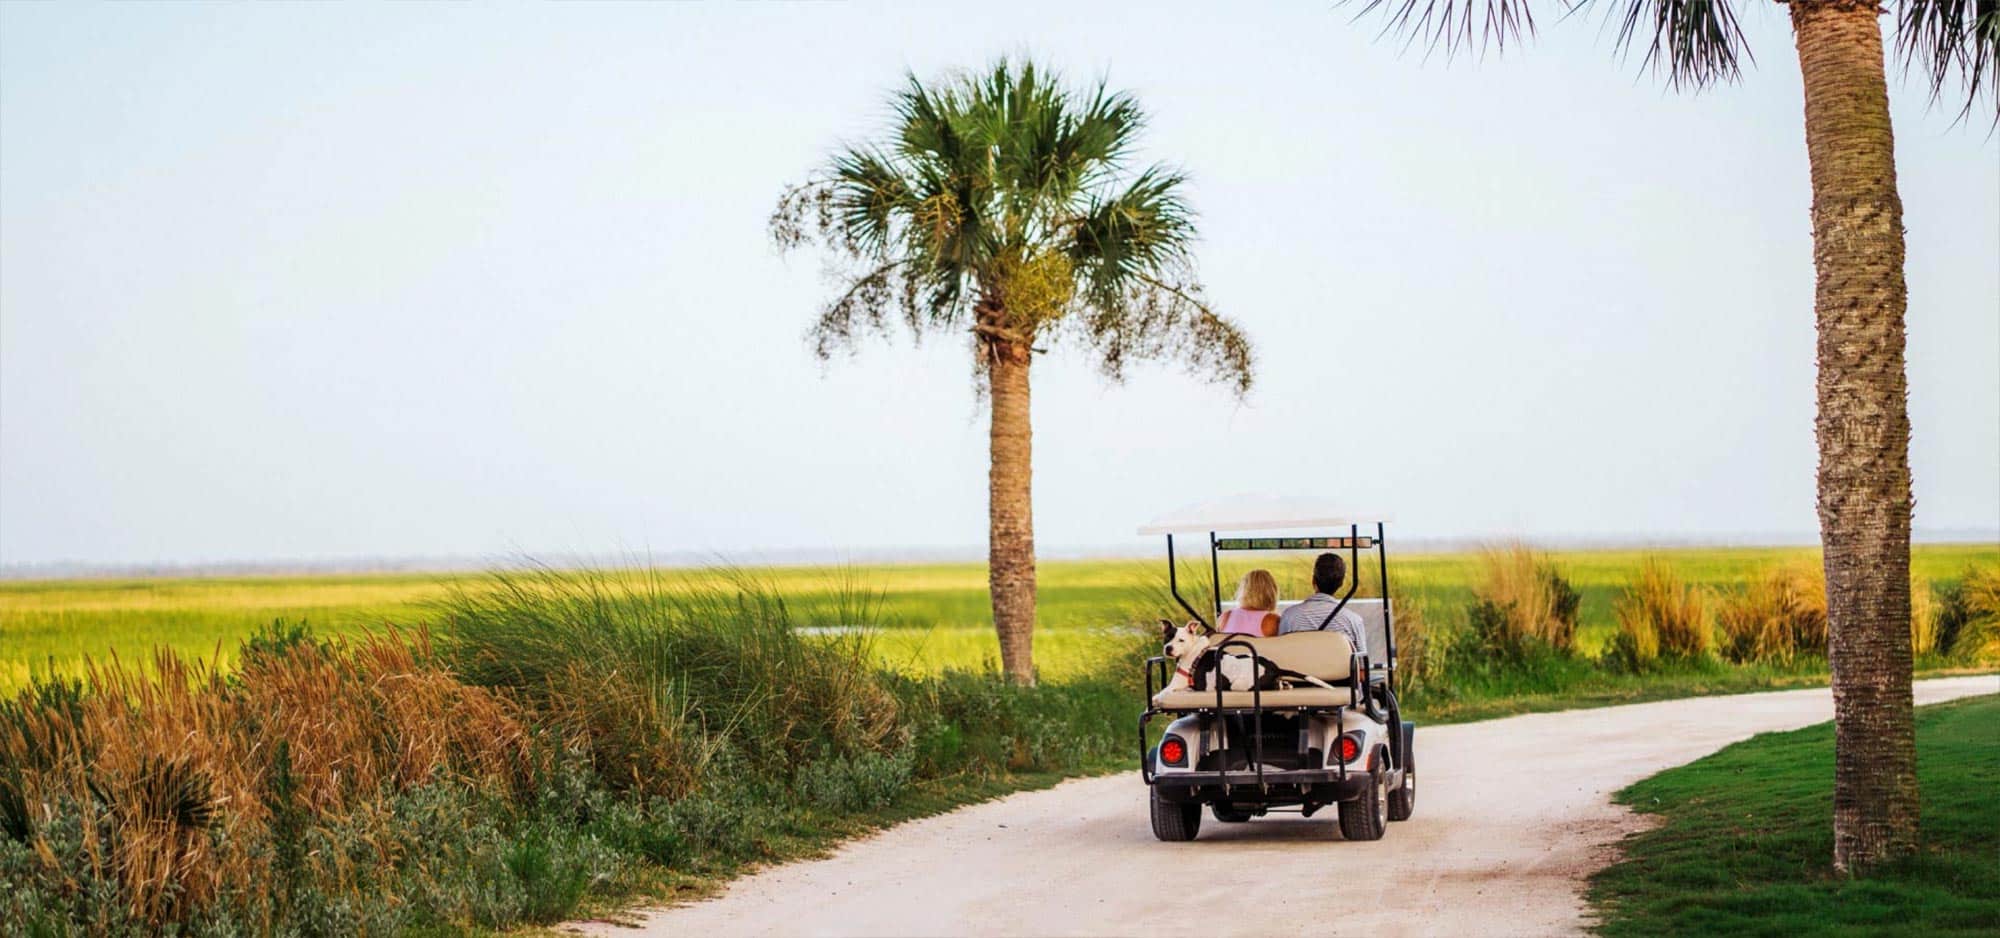 Couple driving a golf cart with a black and white dog on the back on one of the paths lined with palm trees and ornamental grasses.